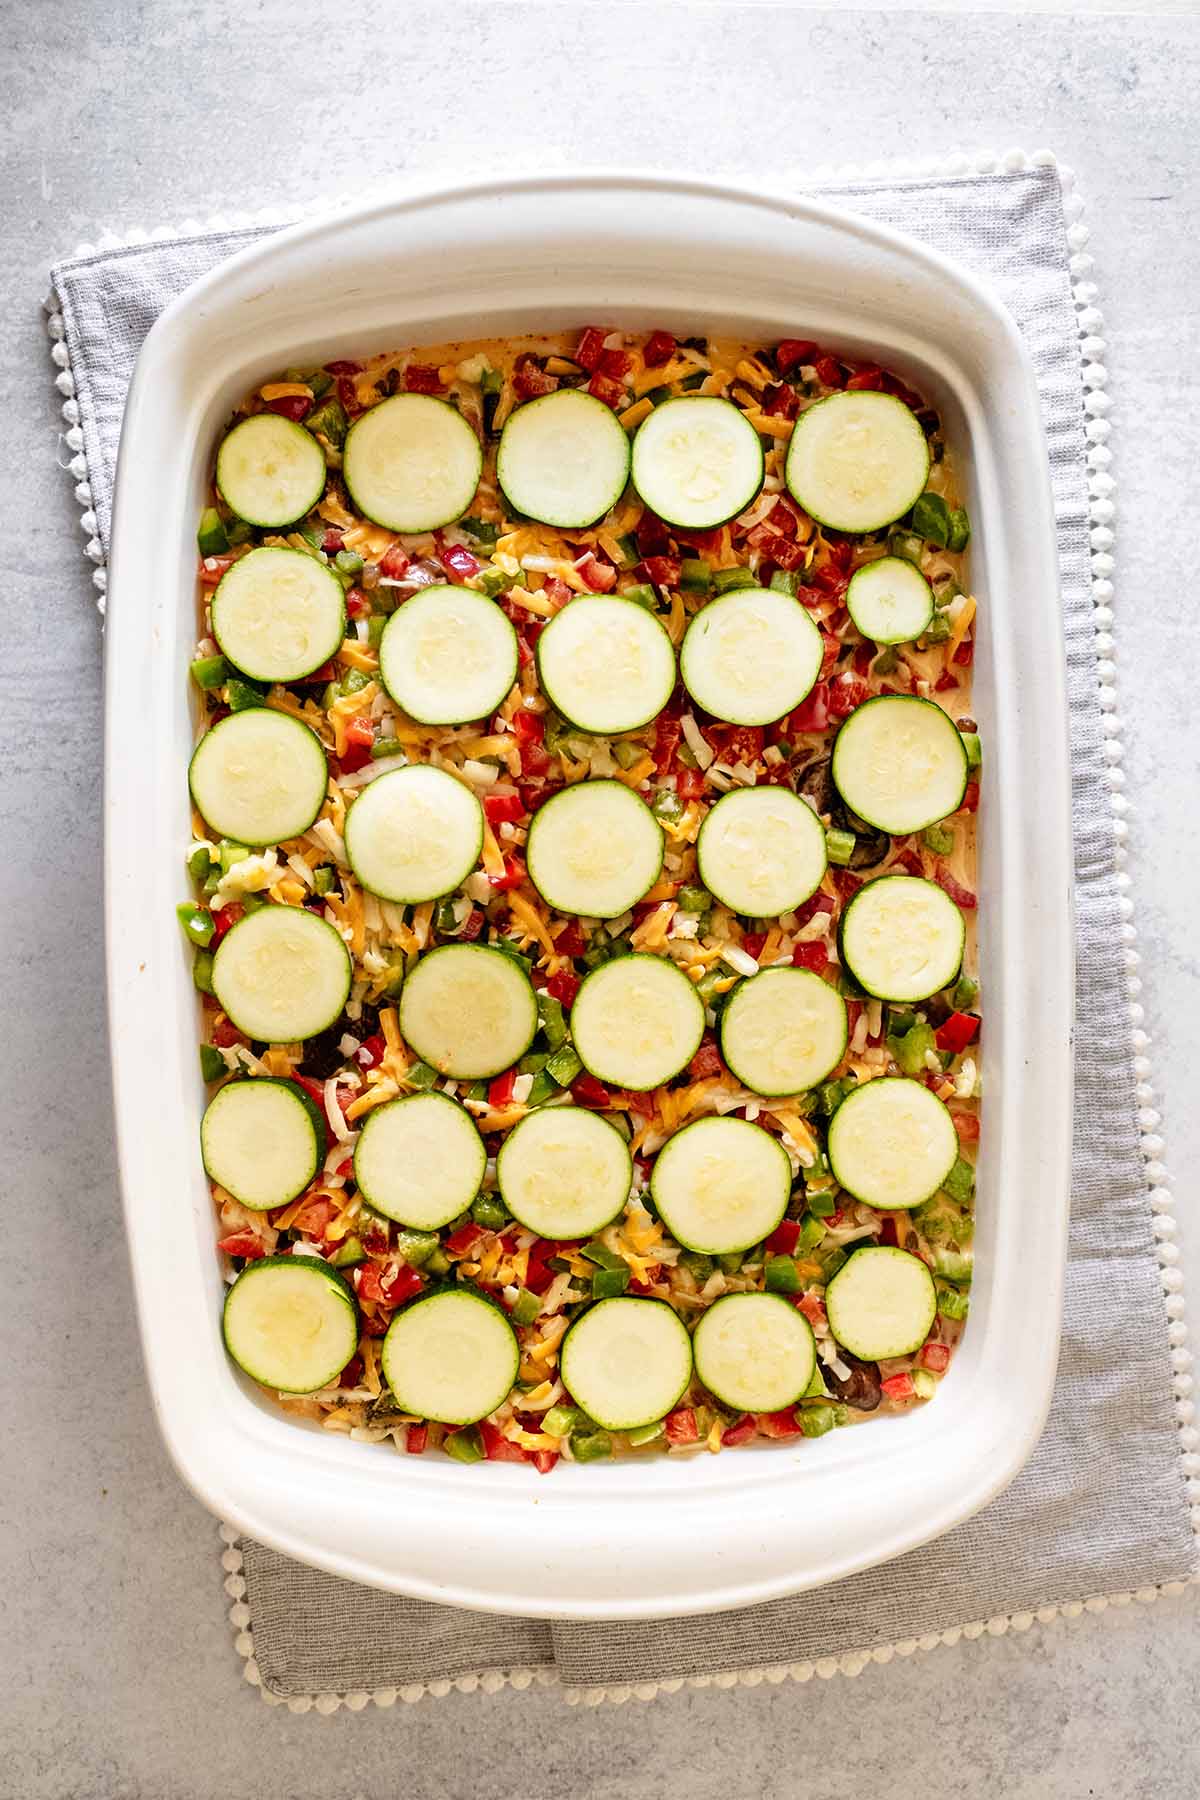 Casserole mixture topped with zucchini slices in a white ceramic baking dish.